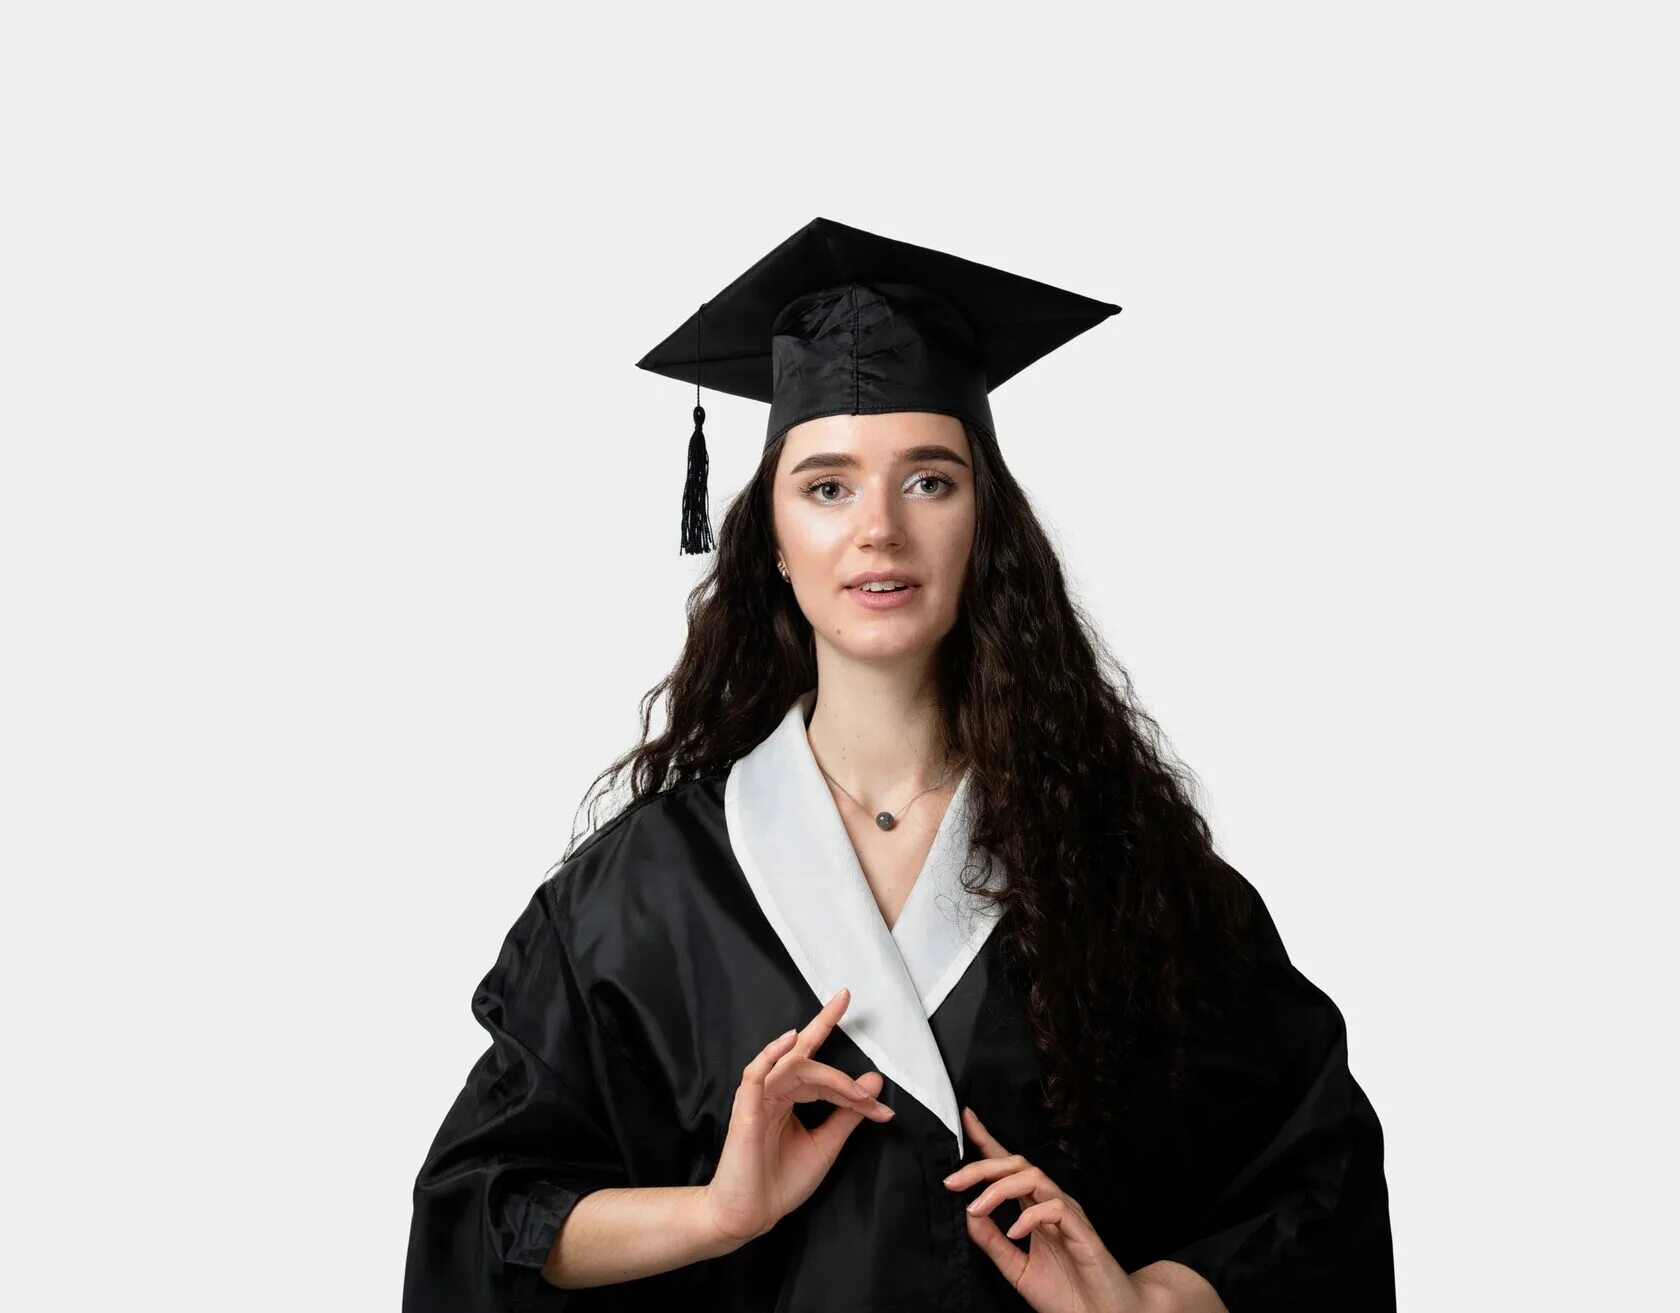 I finished university. Woman in Black Graduation Gown..